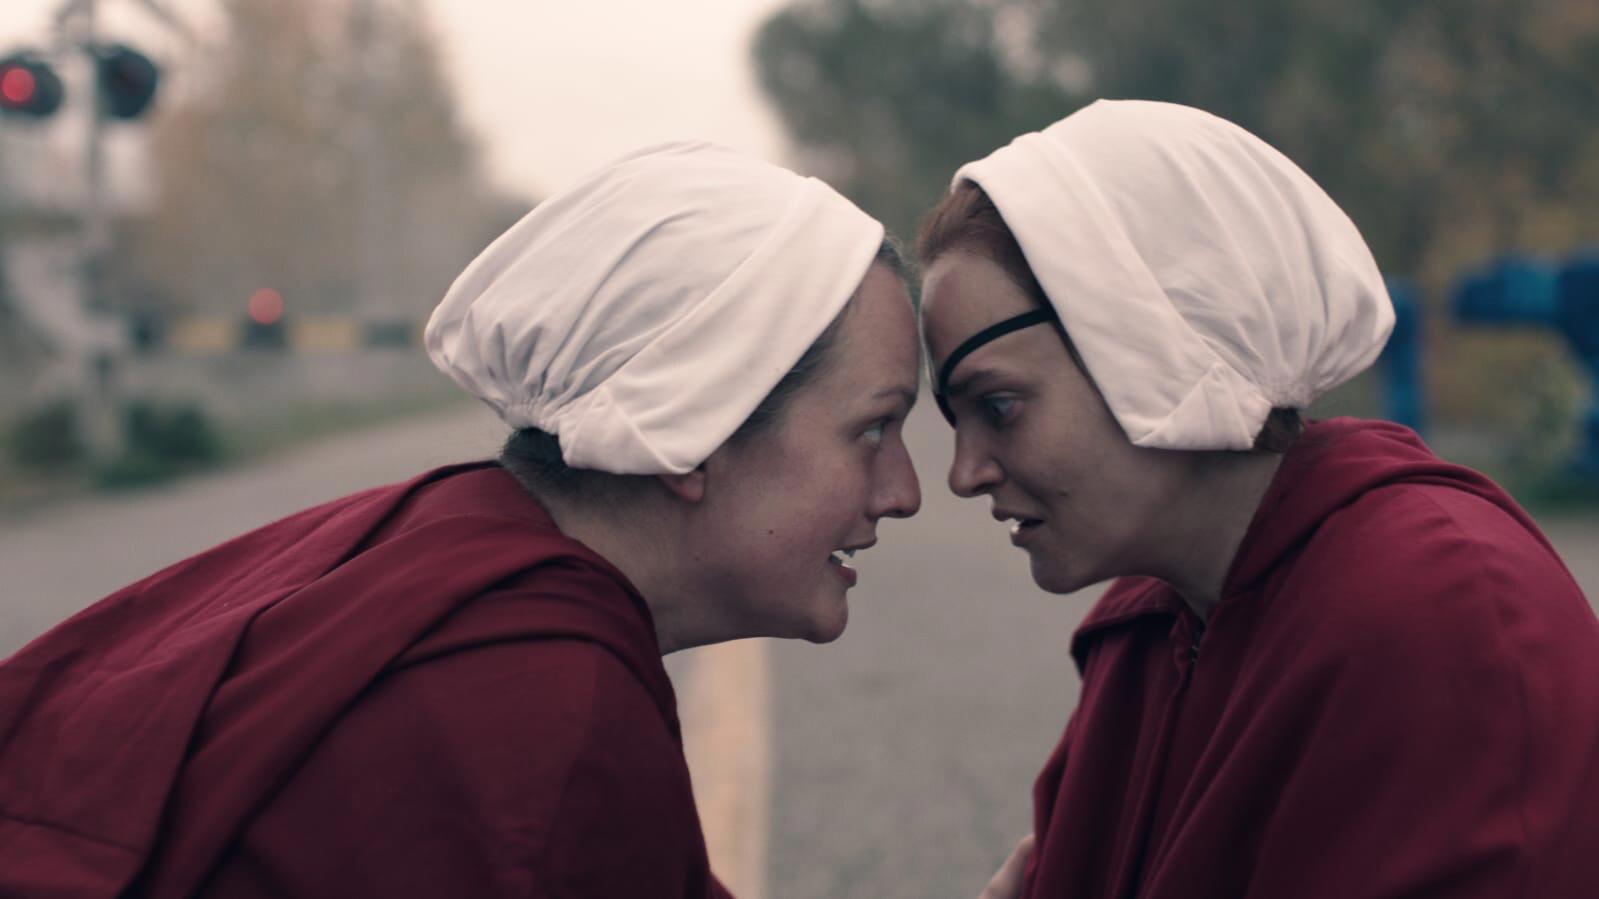 Elisabeth Moss as June and Madeline Brewer as Janine in 'The Handmaid's Tale' Season 4 Episode 4, 'Milk.' The previous episode, 'The Crossing,' was Moss' directorial debut. And 'Milk' showed the aftermath. In the photo, Moss and Madeline Brewer look at each other in distress on an empty road. They wear red Handmaid uniforms white white bonnets. It's daytime and cloudy.